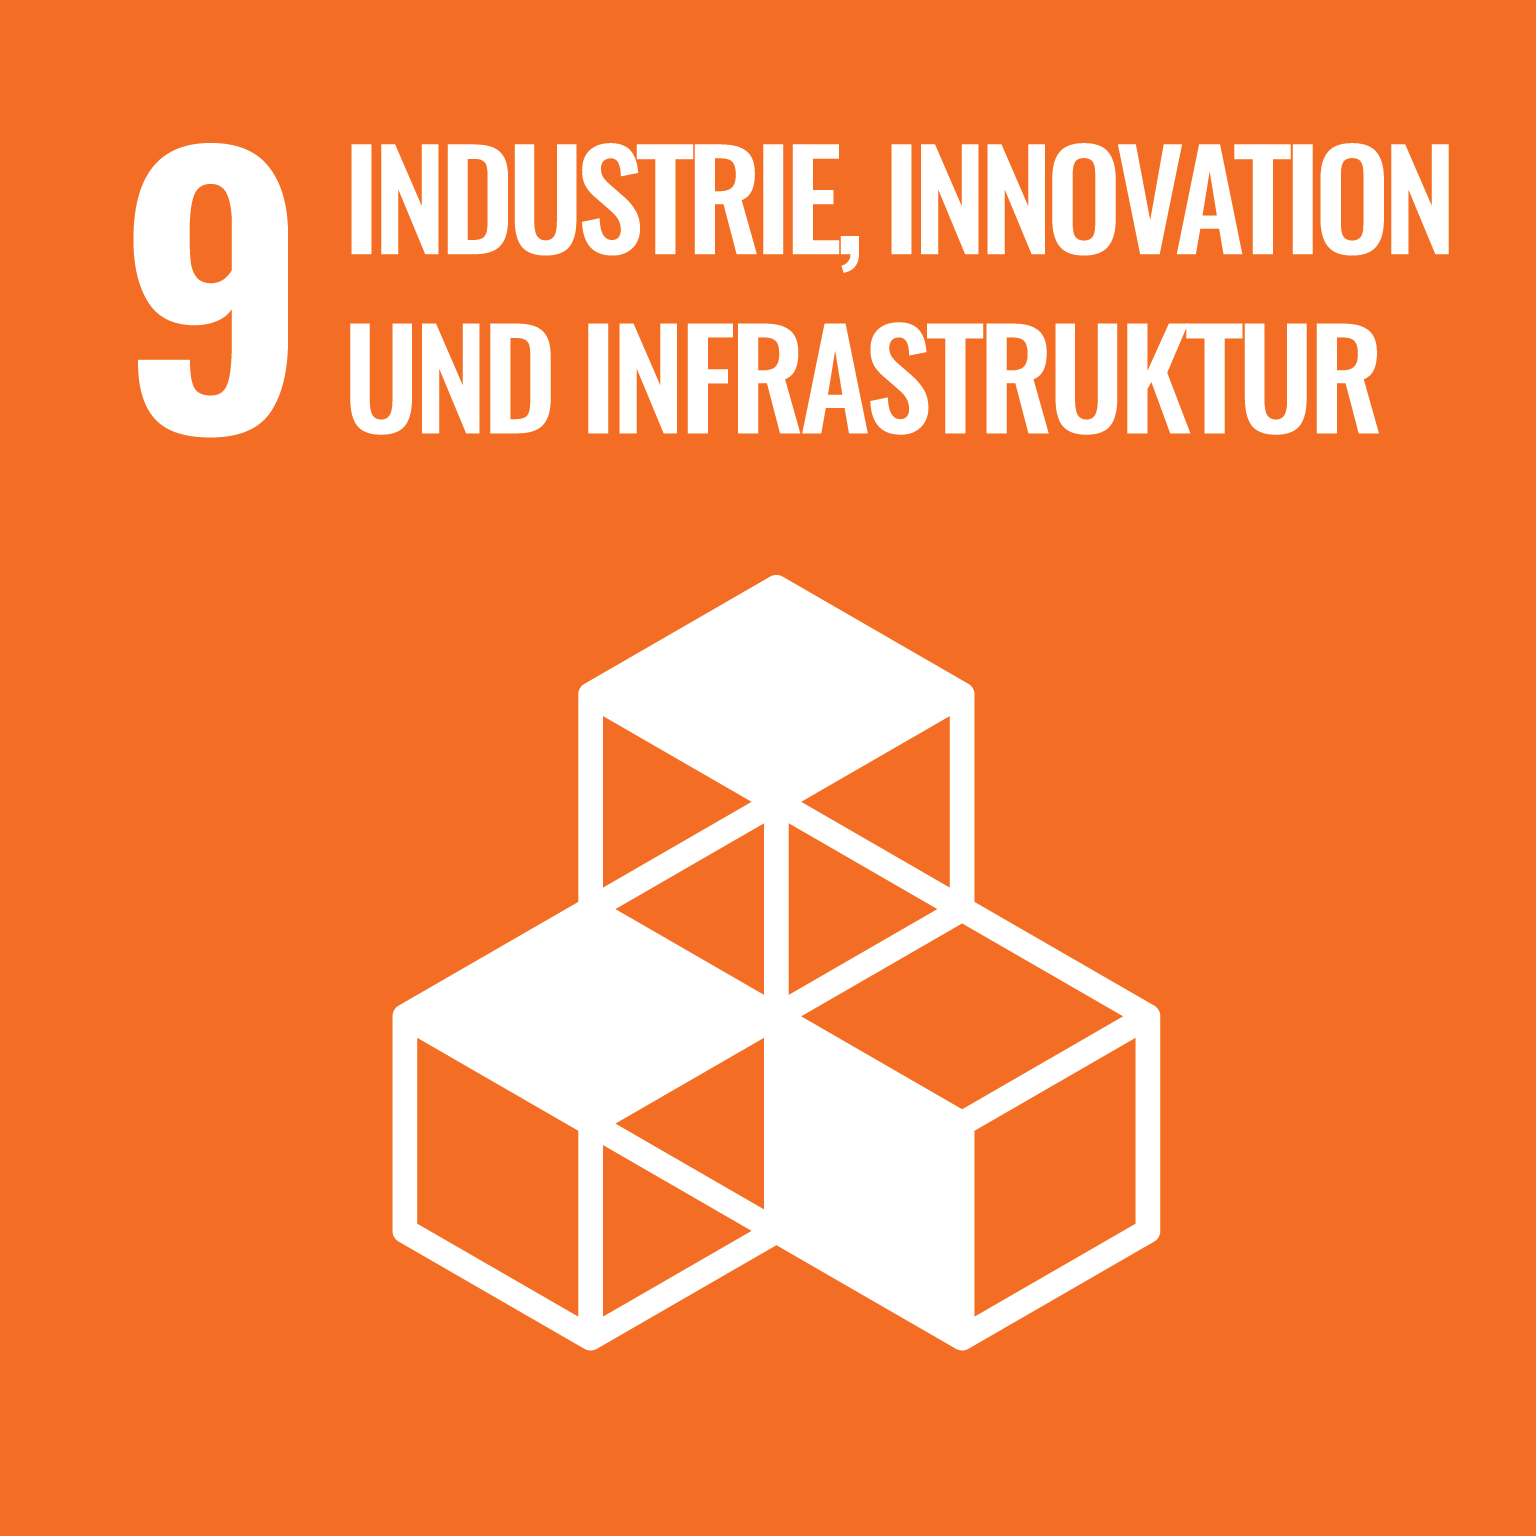 The graphic shows the logo of SDG 9, Industry, Innovation and Infrastructure.